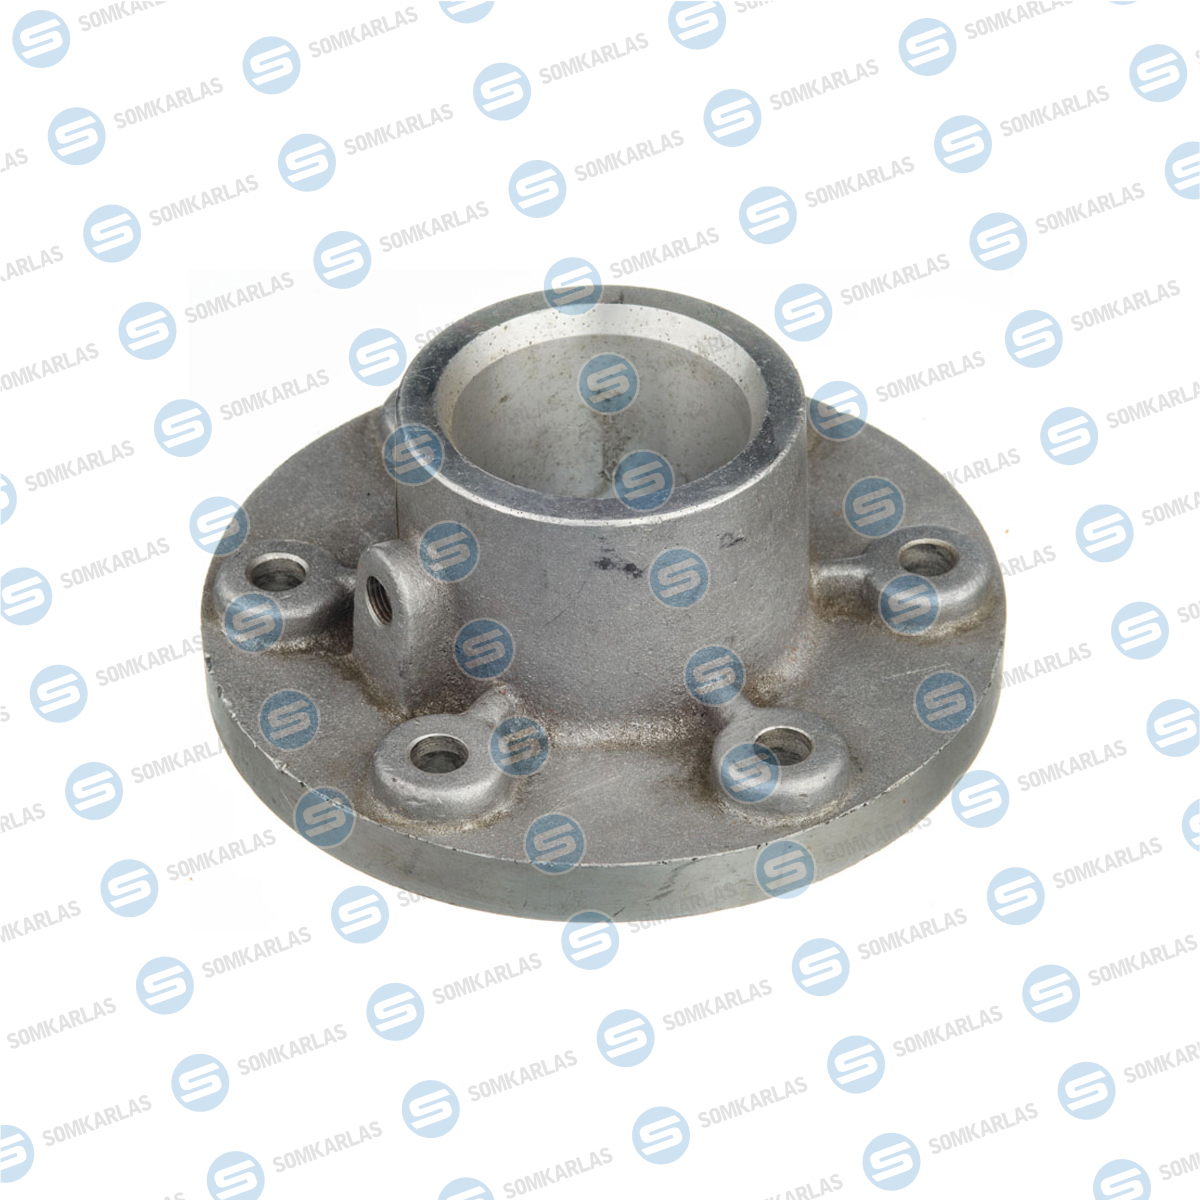 SOM30177 - FLANGED BEARING OPEN - 